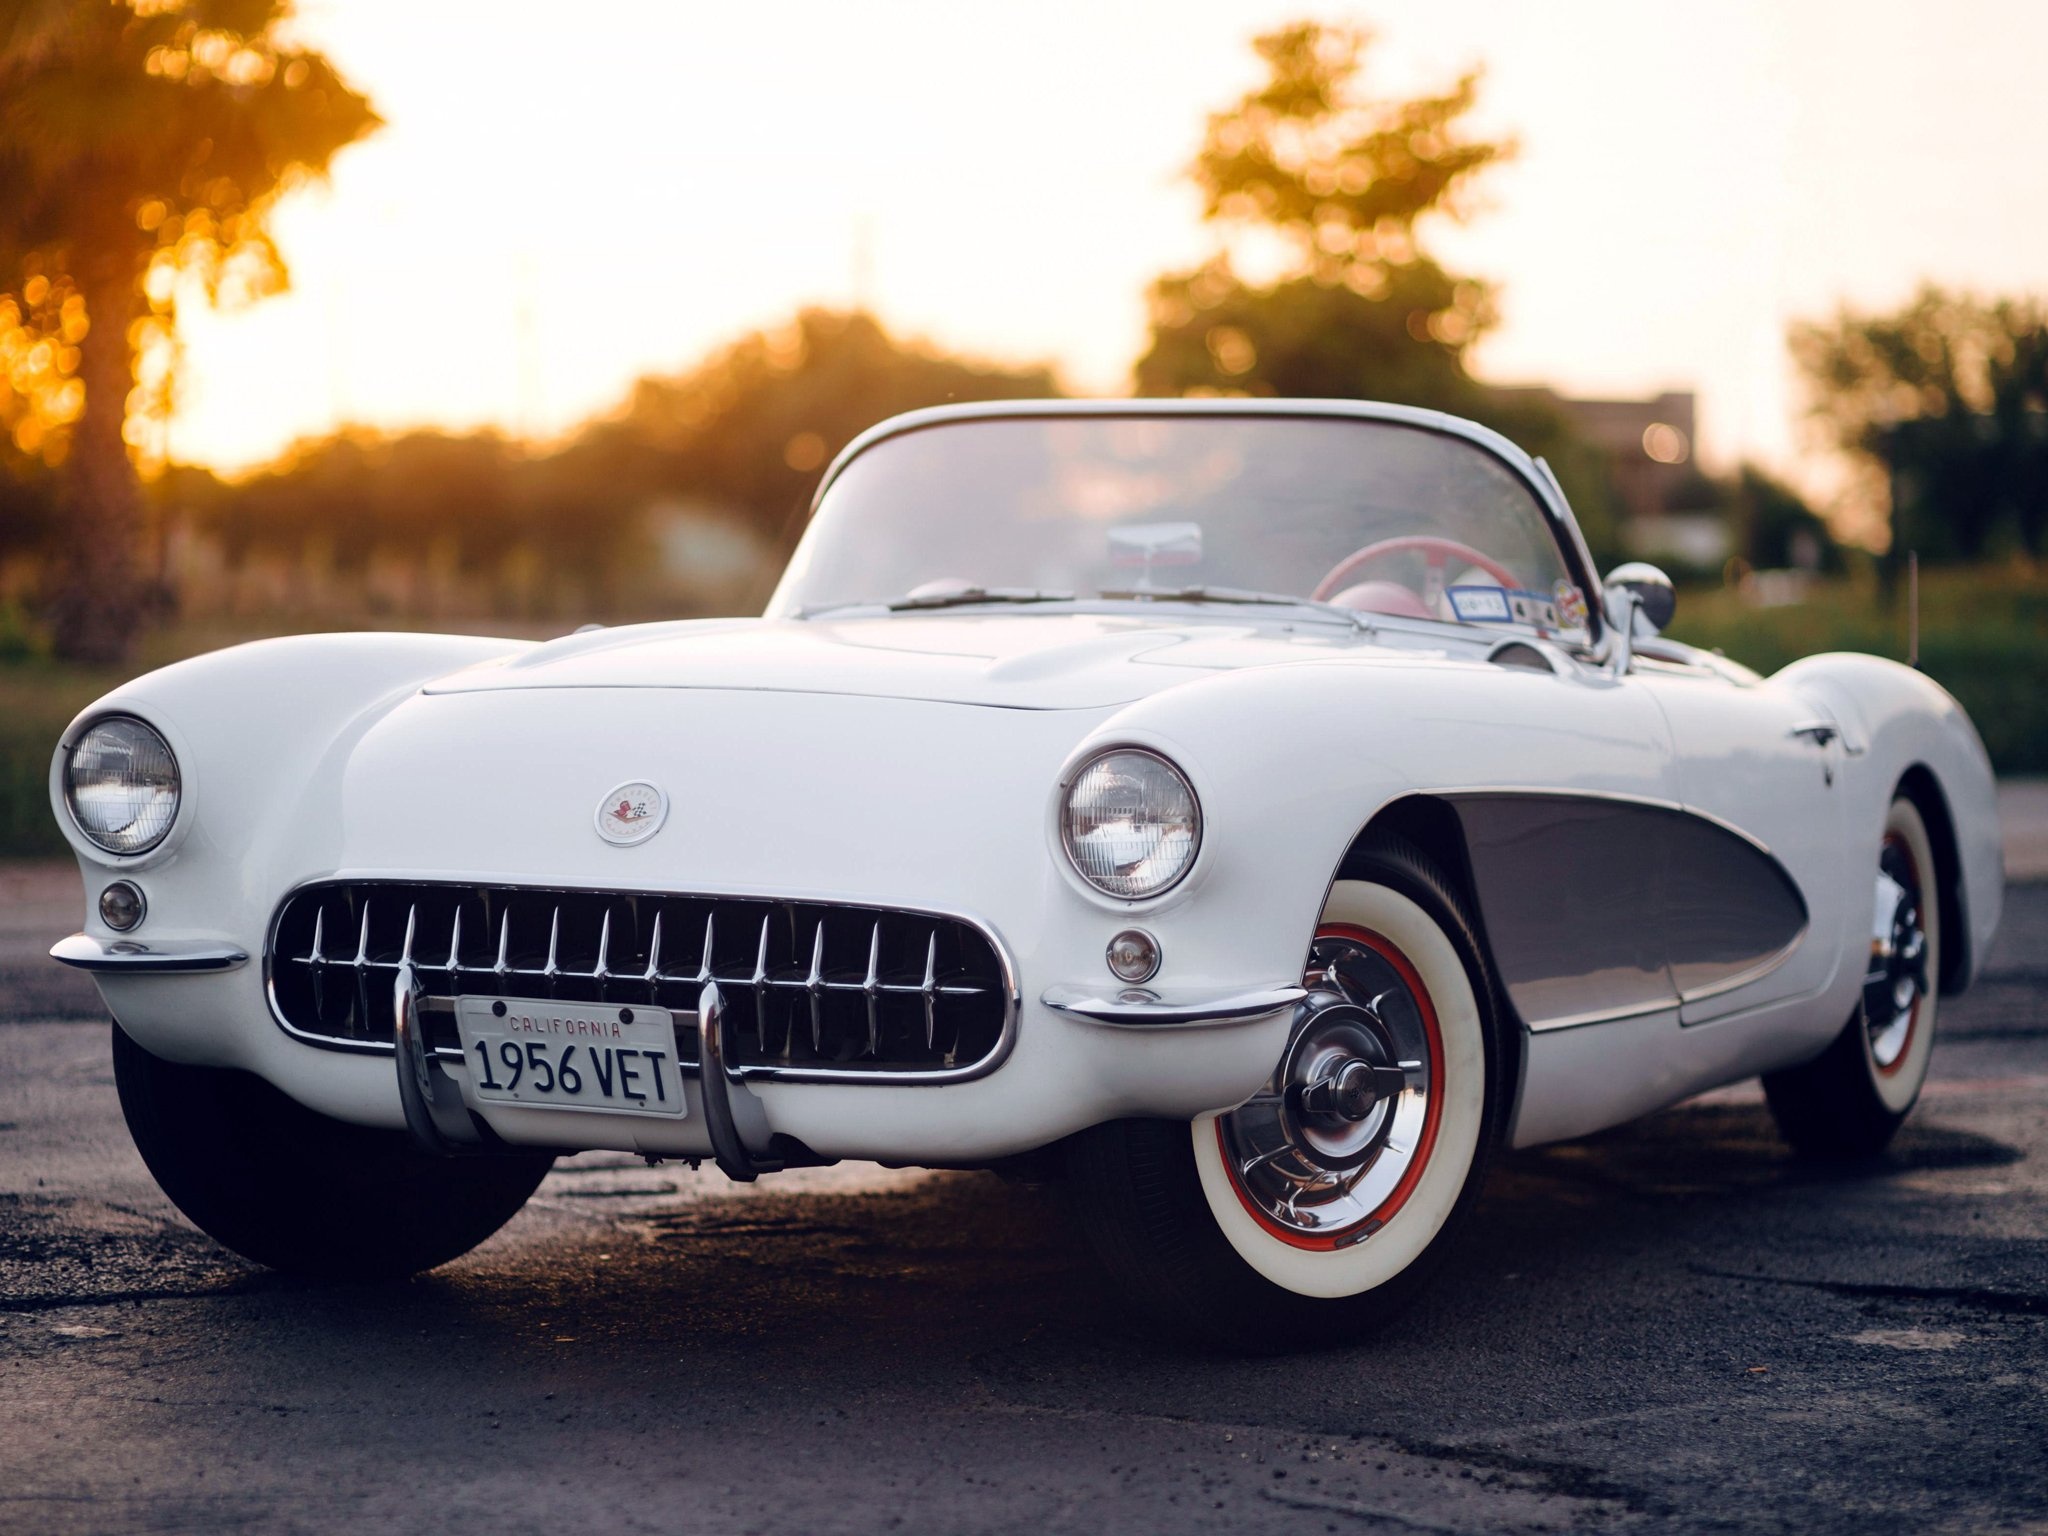 Corvette: Chevrolet C1 of 1956, The first generation of a classic American sports car. 2050x1540 HD Background.